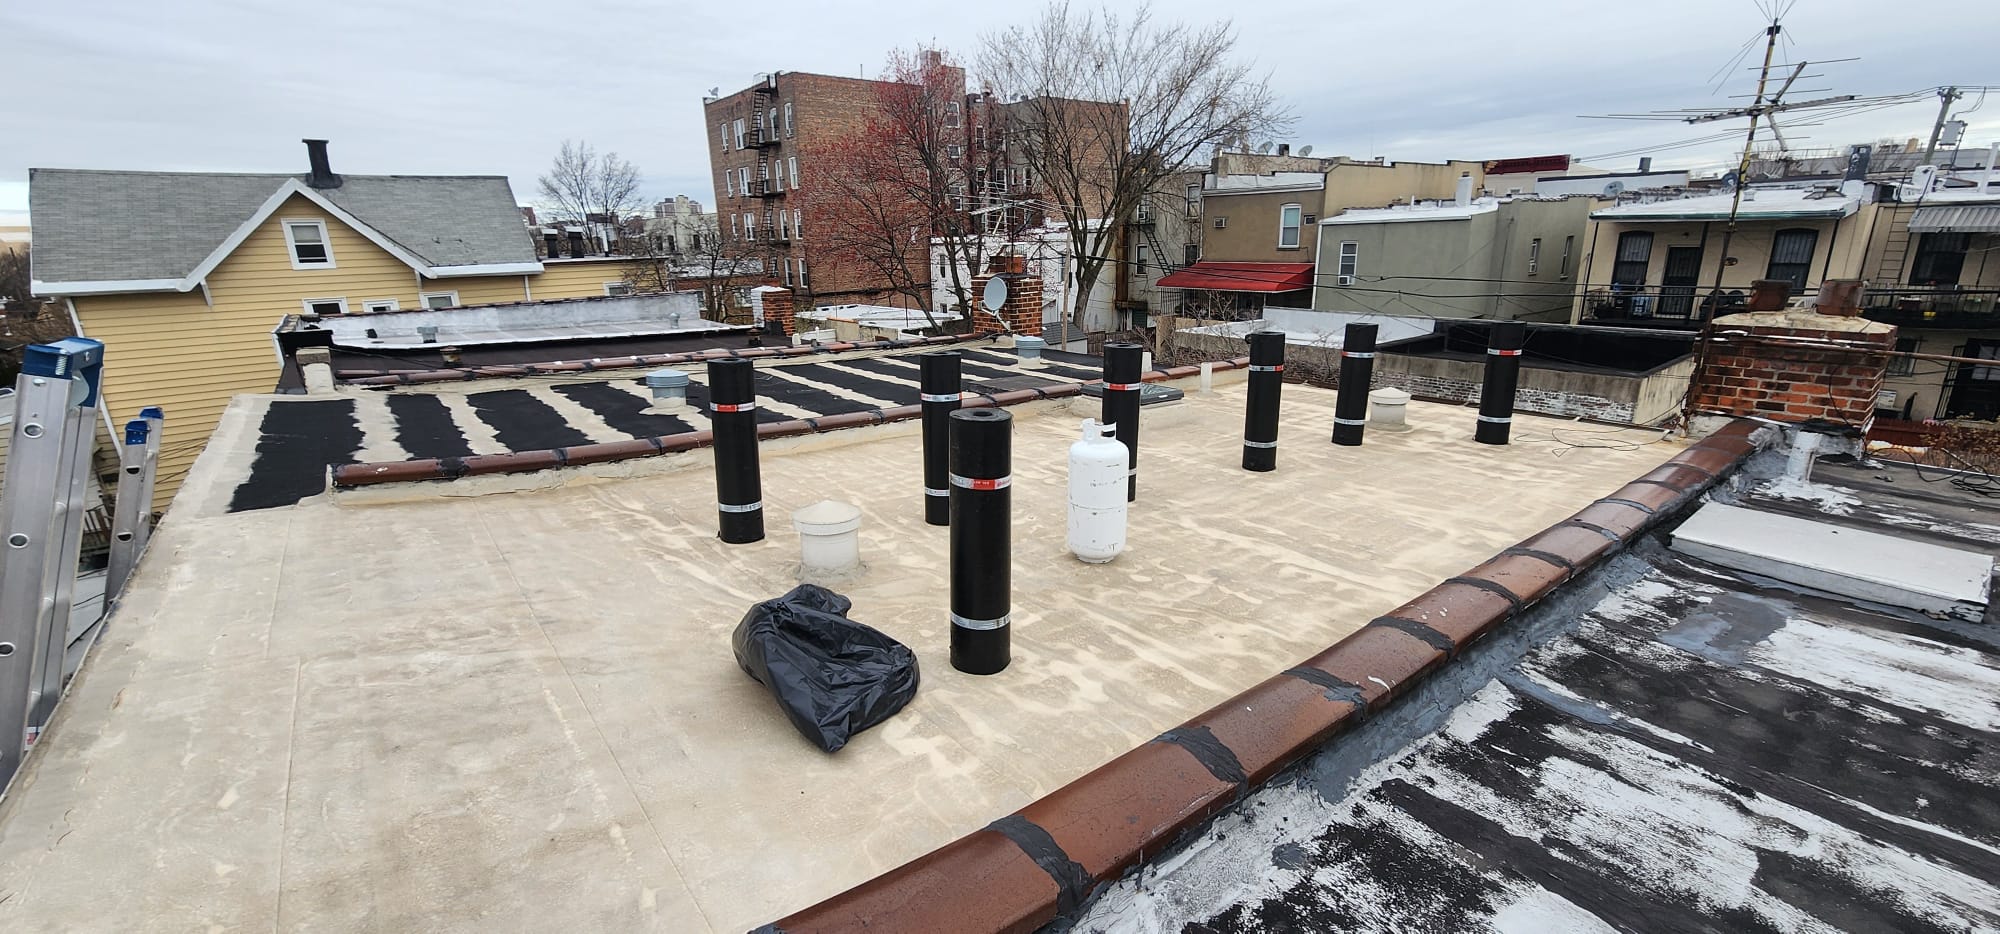 New Aluminum Flat Roof Installation in the Bronx NYC Project Shot 1